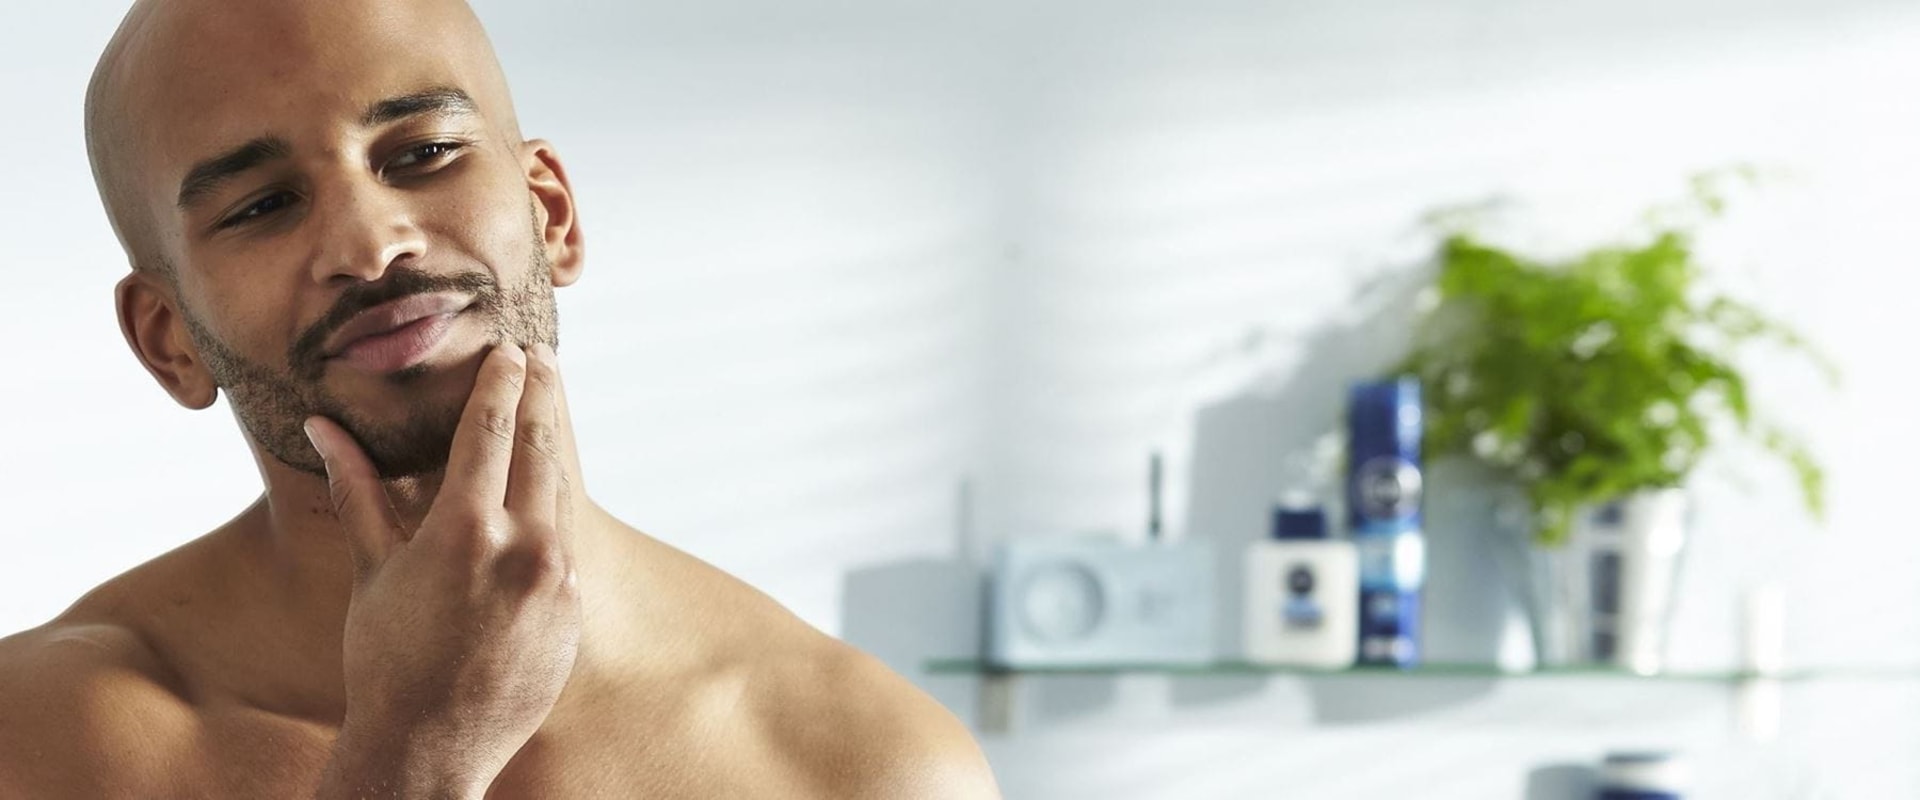 The Best Beauty Care Products for Men with Sensitive Skin